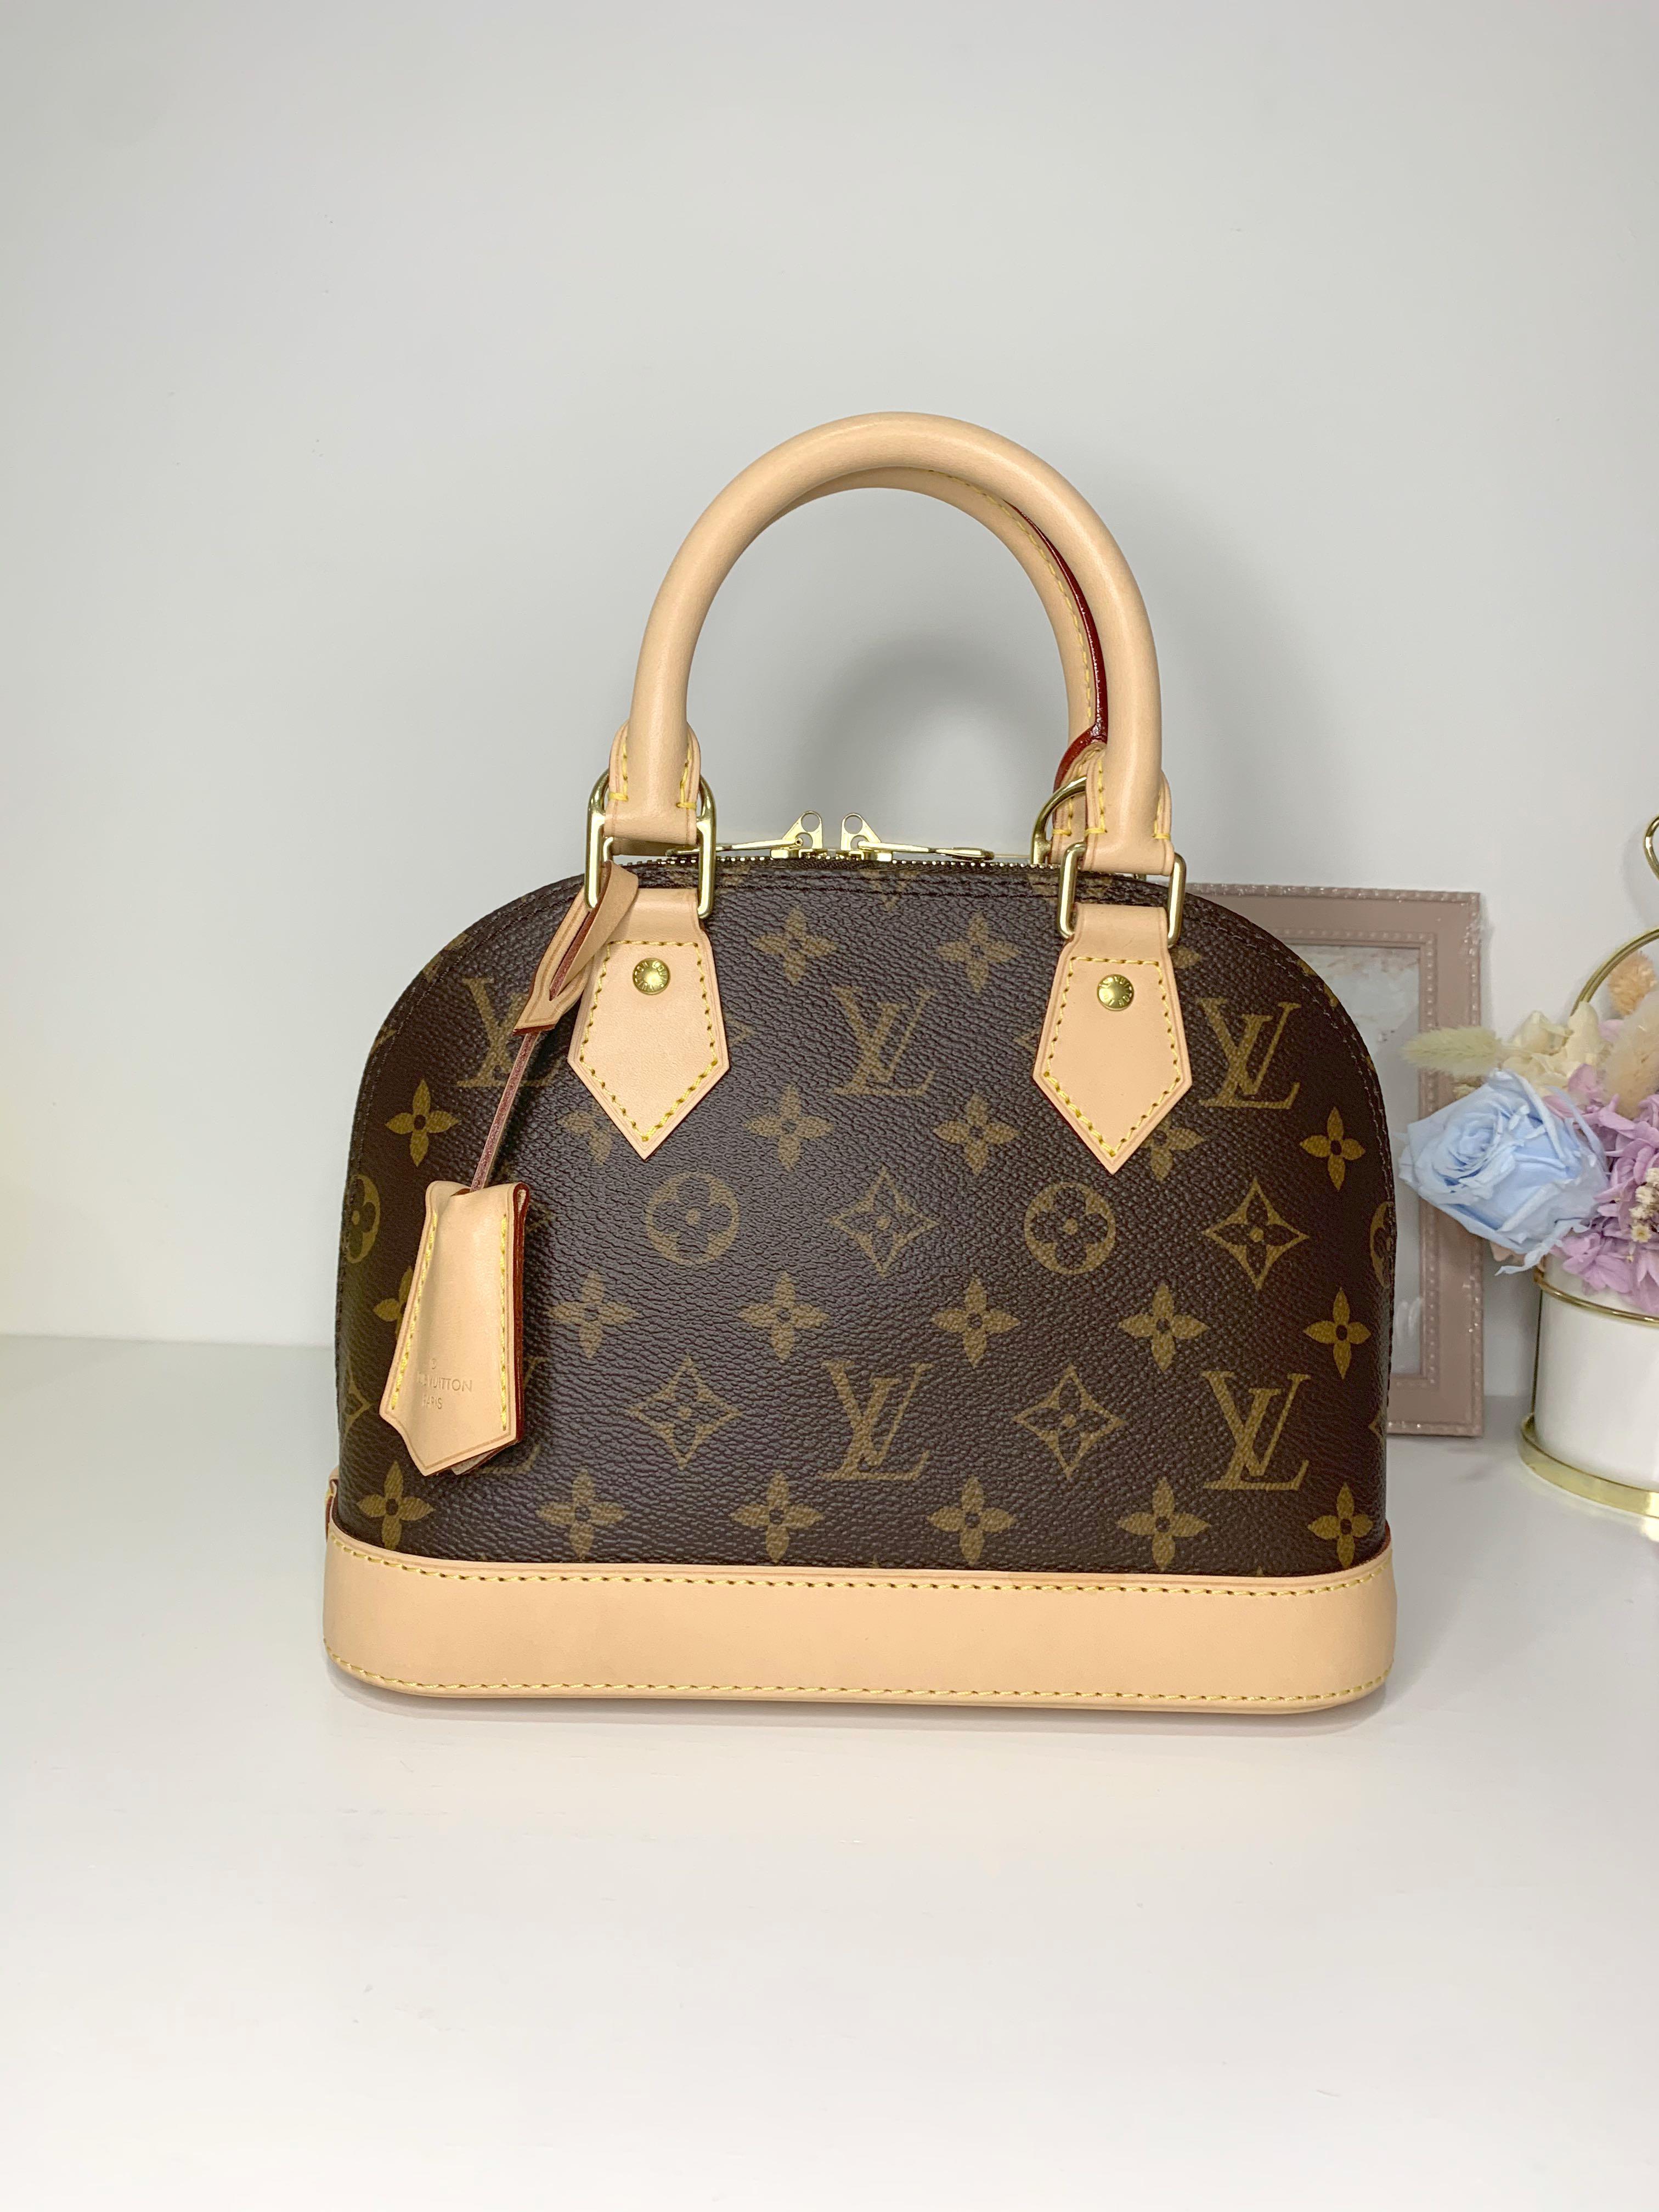 WHAT'S IN MY BAG 2020  Louis Vuitton Neo Alma BB 